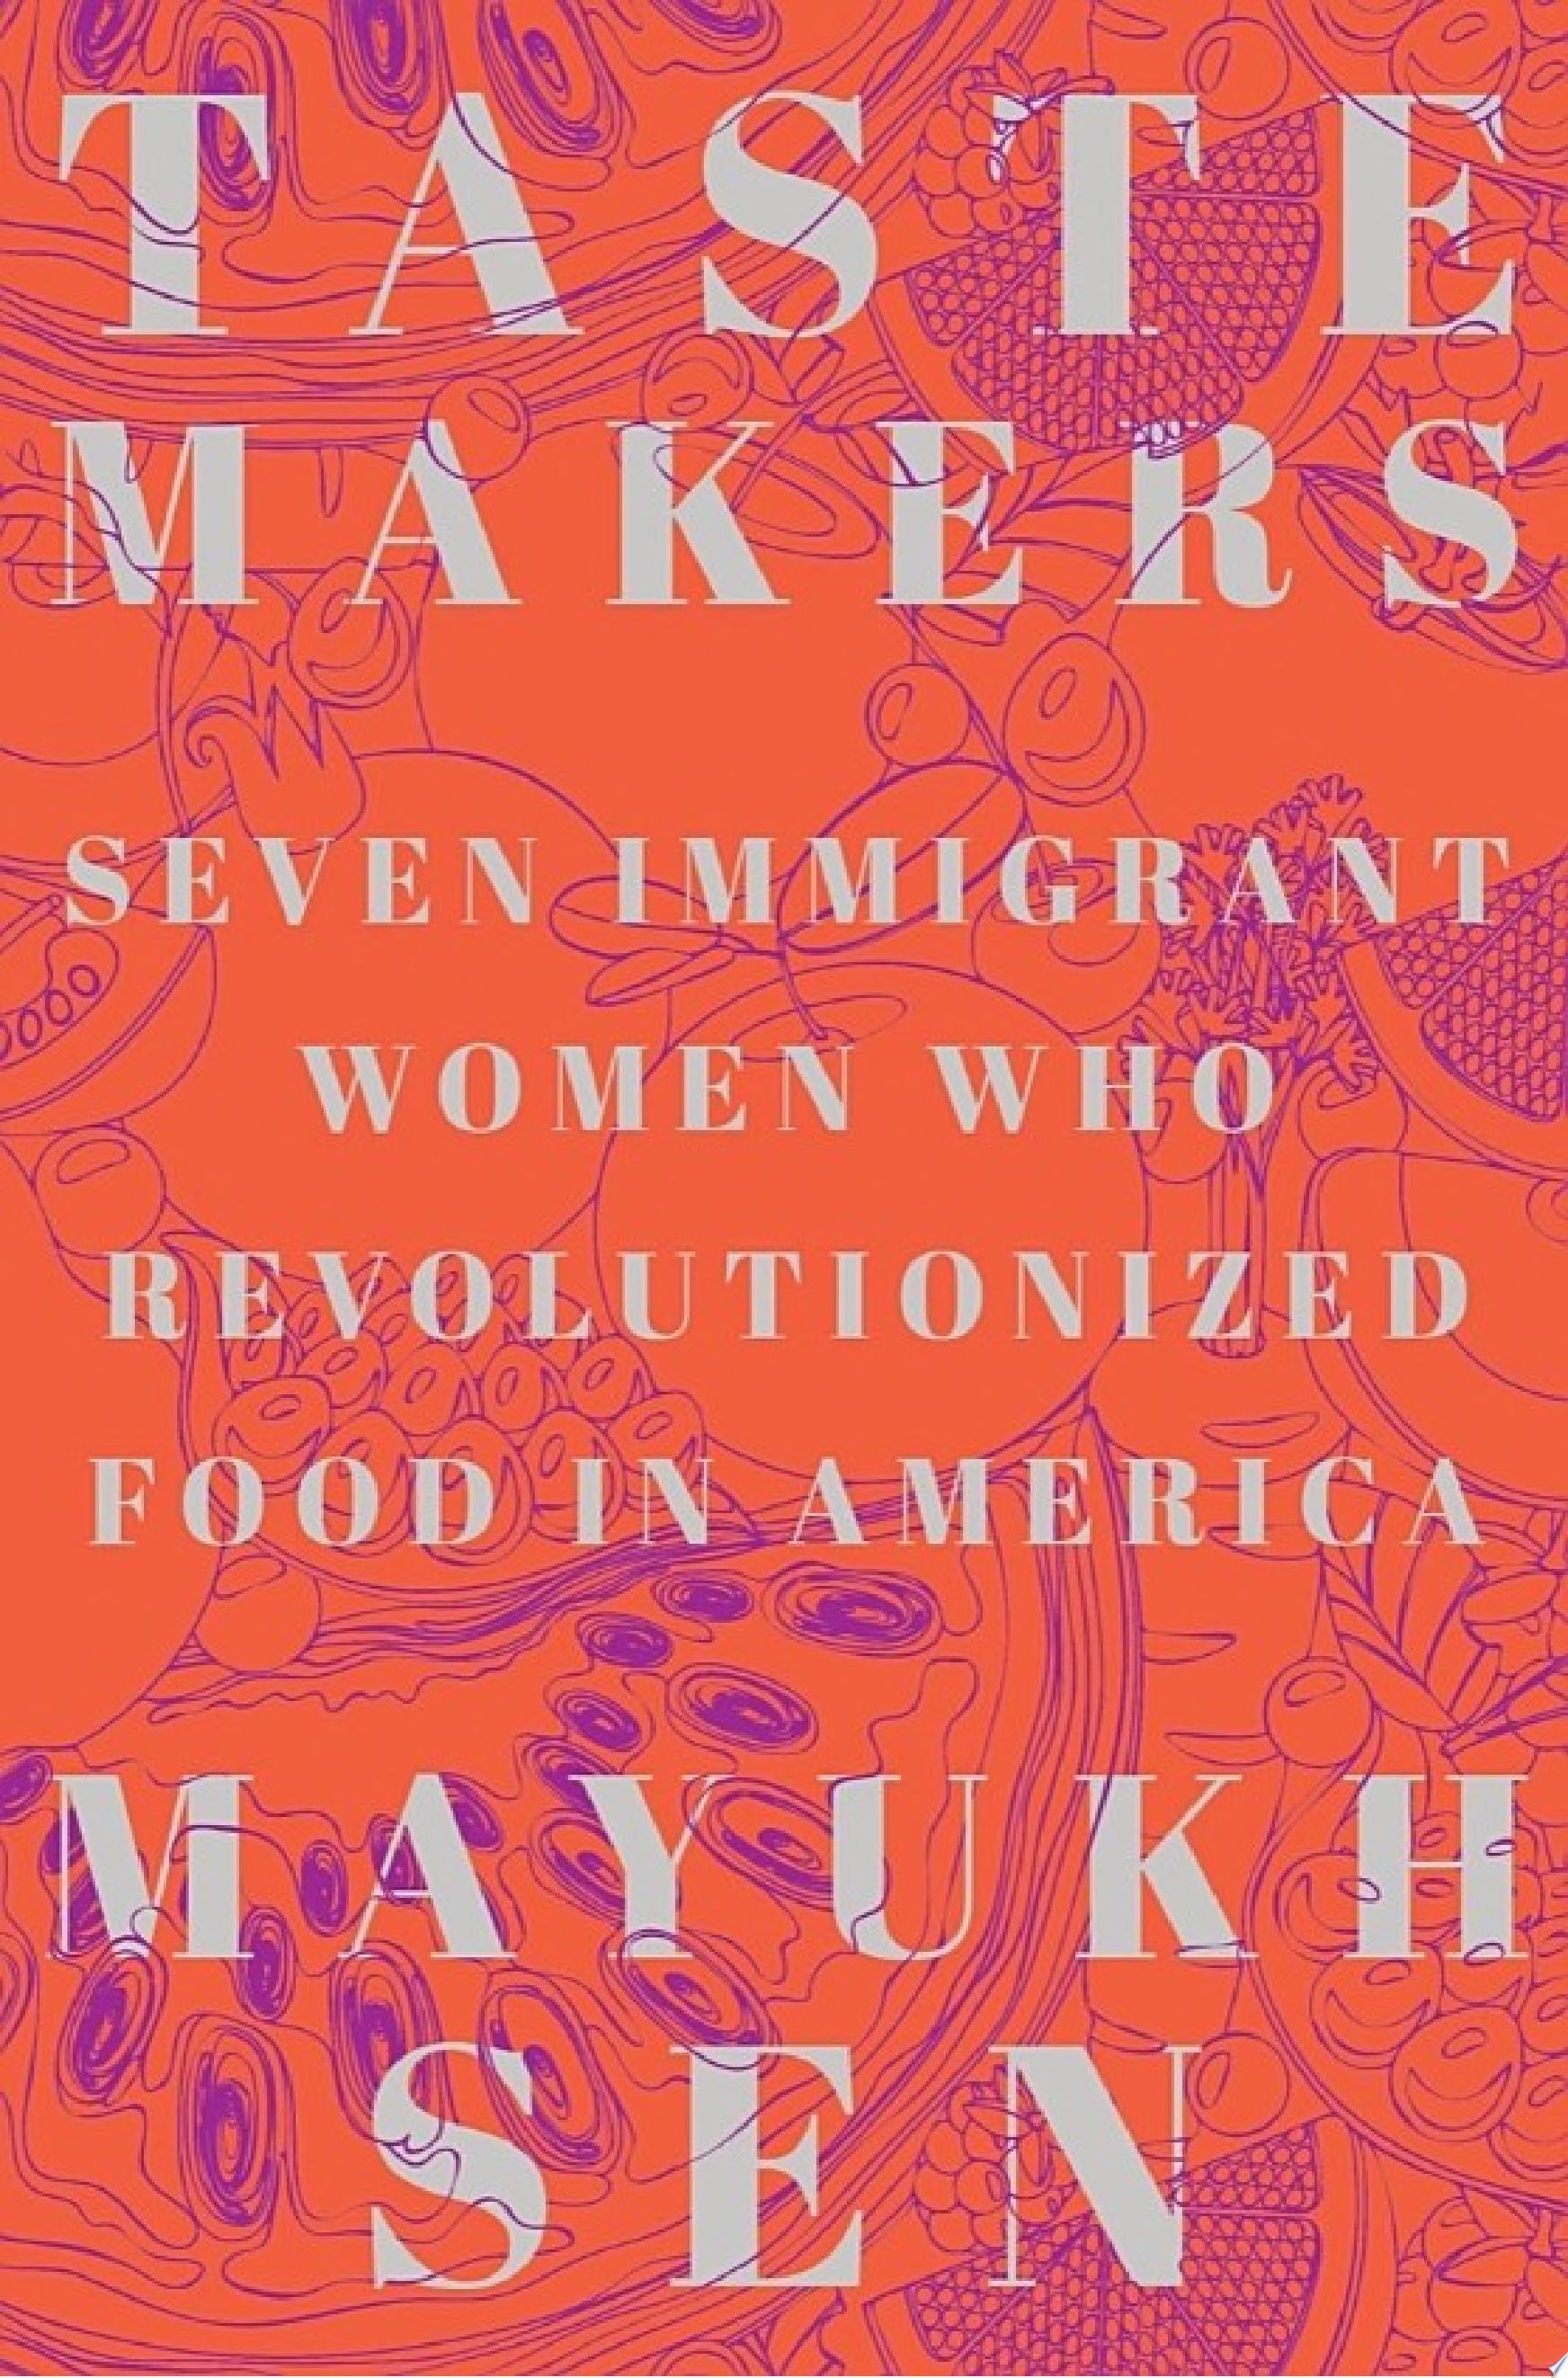 Image for "Taste Makers: Seven Immigrant Women Who Revolutionized Food in America"